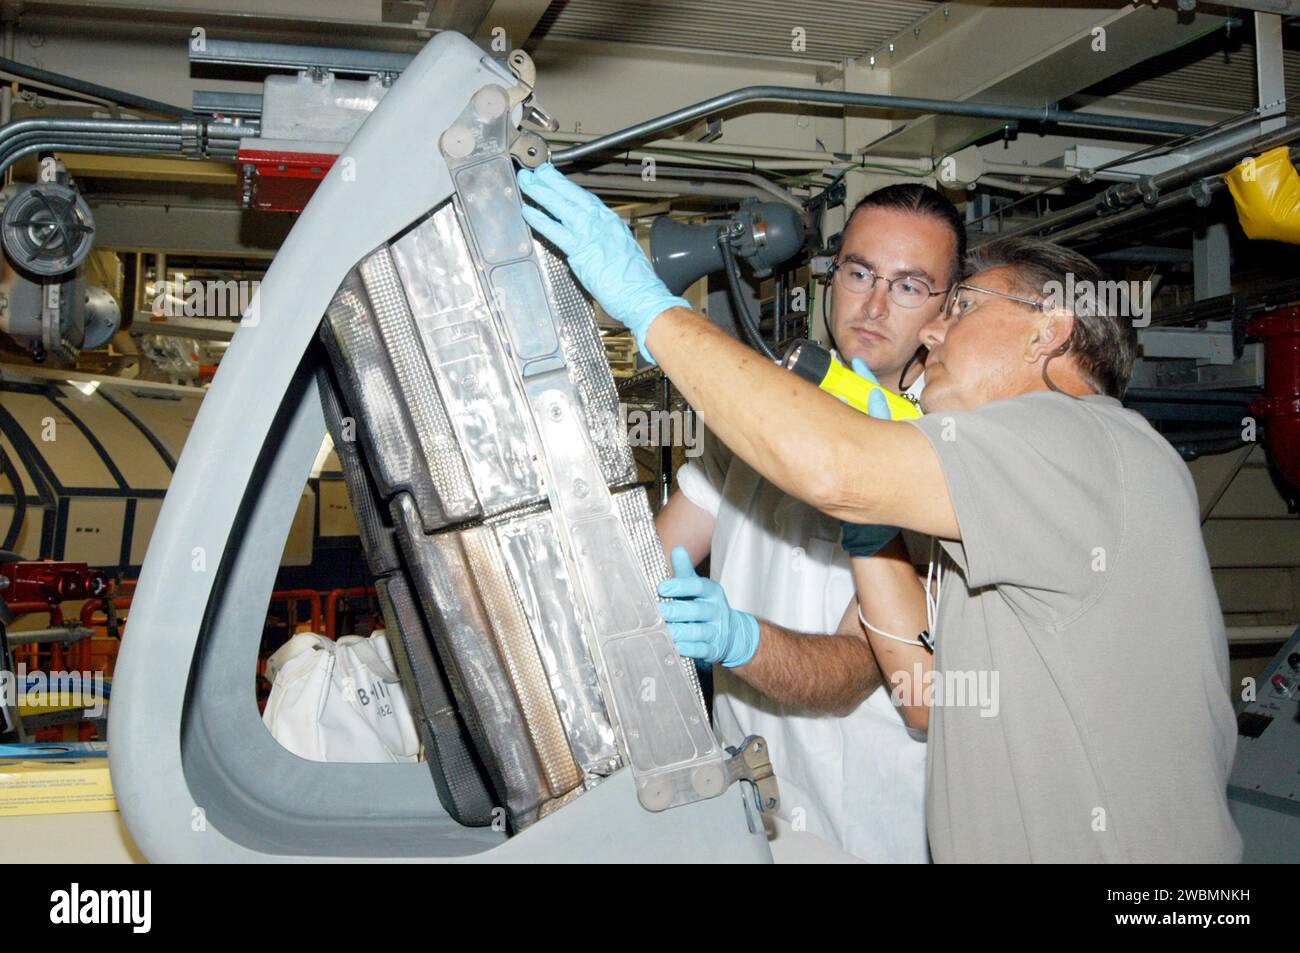 KENNEDY SPACE CENTER, FLA. -In the Orbiter Processing Facility, Matt Scott (left), with United Space Alliance, and Donald Wall (right), with NASA Quality Assurance, closely inspect the final Reinforced Carbon-Carbon (RCC) panel to be installed on orbiter Discovery’s left wing. The leading edges of each of an orbiter’s wings have 22 RCC panels. They are light gray and made entirely of carbon composite material, which protect the orbiter during re-entry. The molded components are approximately 0.25- to 0.5-inch thick and capable of withstanding temperatures up to 3,220 degrees F. Following the C Stock Photo